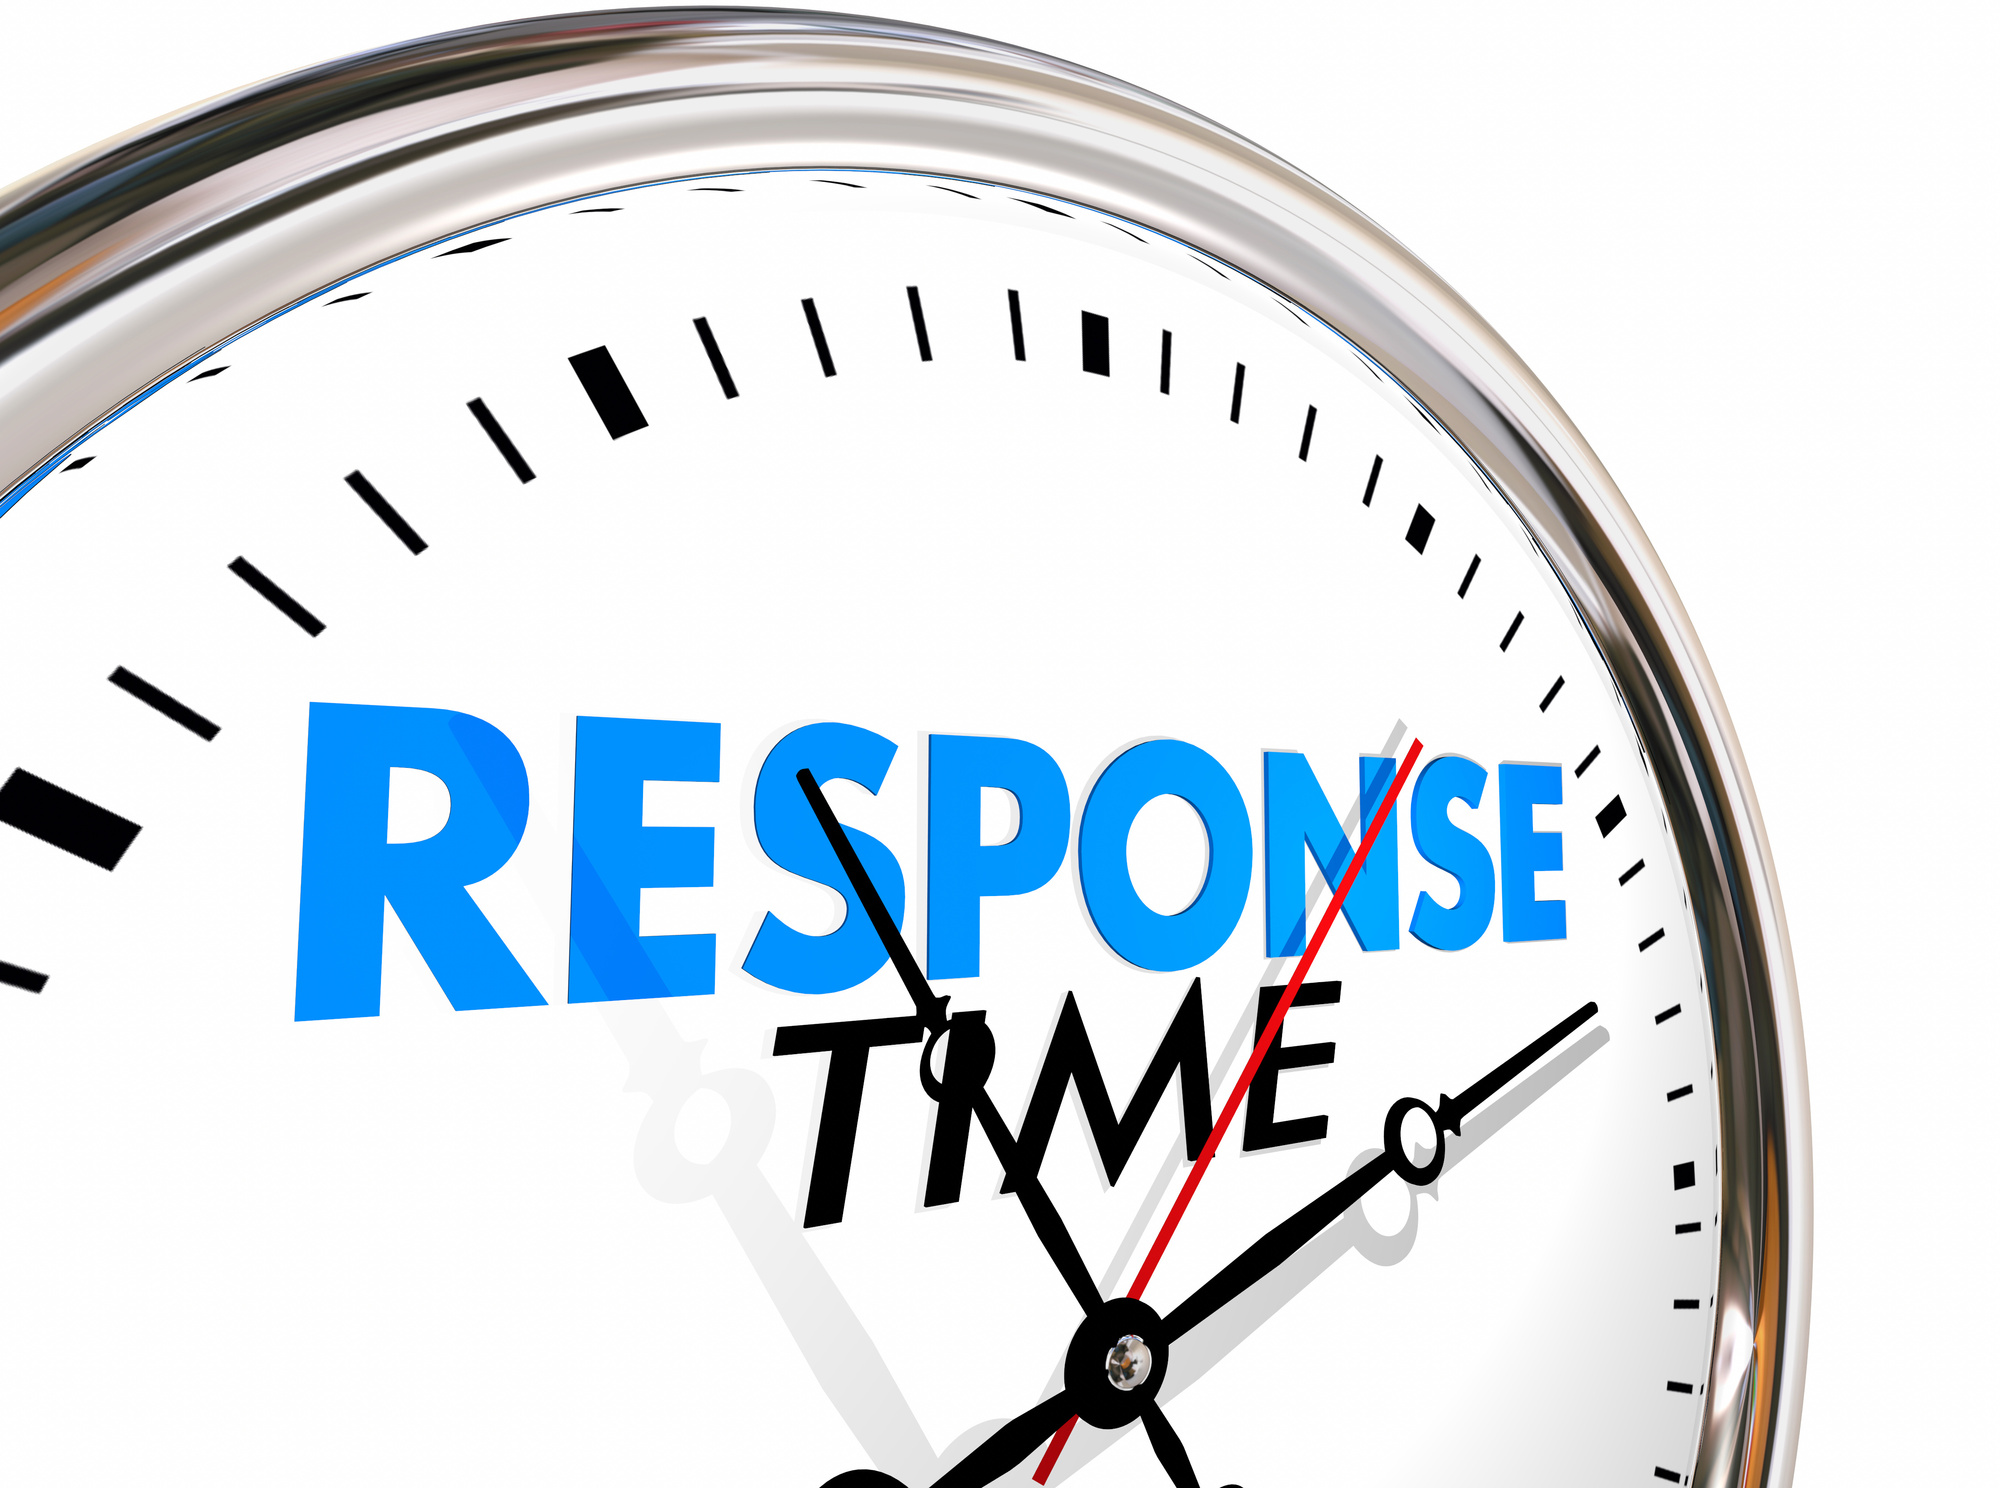 page response time